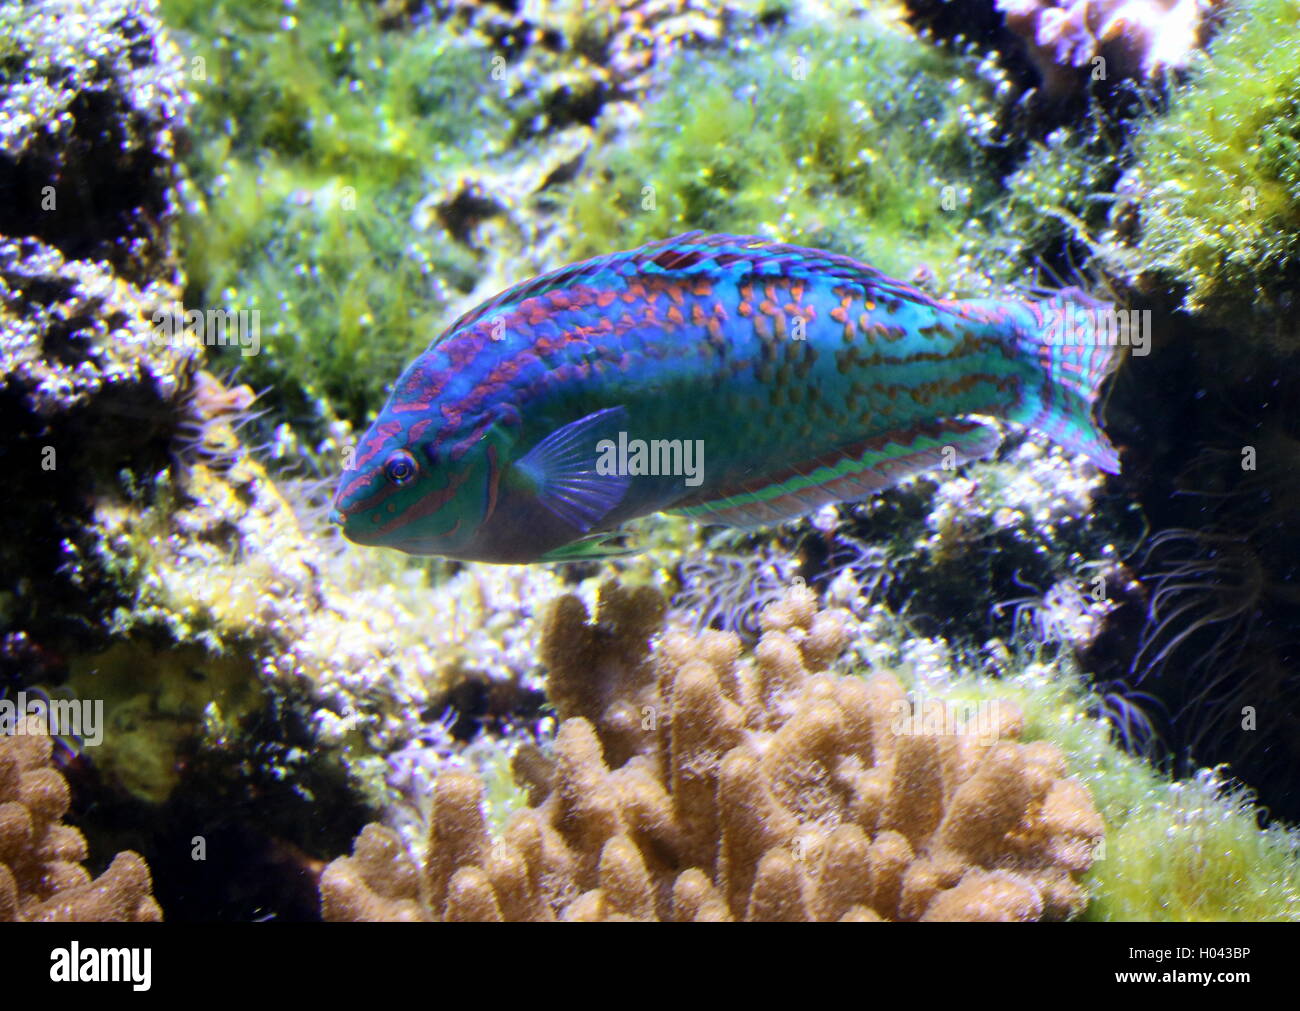 Tail-spot wrasse or Hoeven's Wrasse (Halichoeres melanurus), native to the Pacific Ocean - Japan, Samoa, Great Barrier Reef Stock Photo